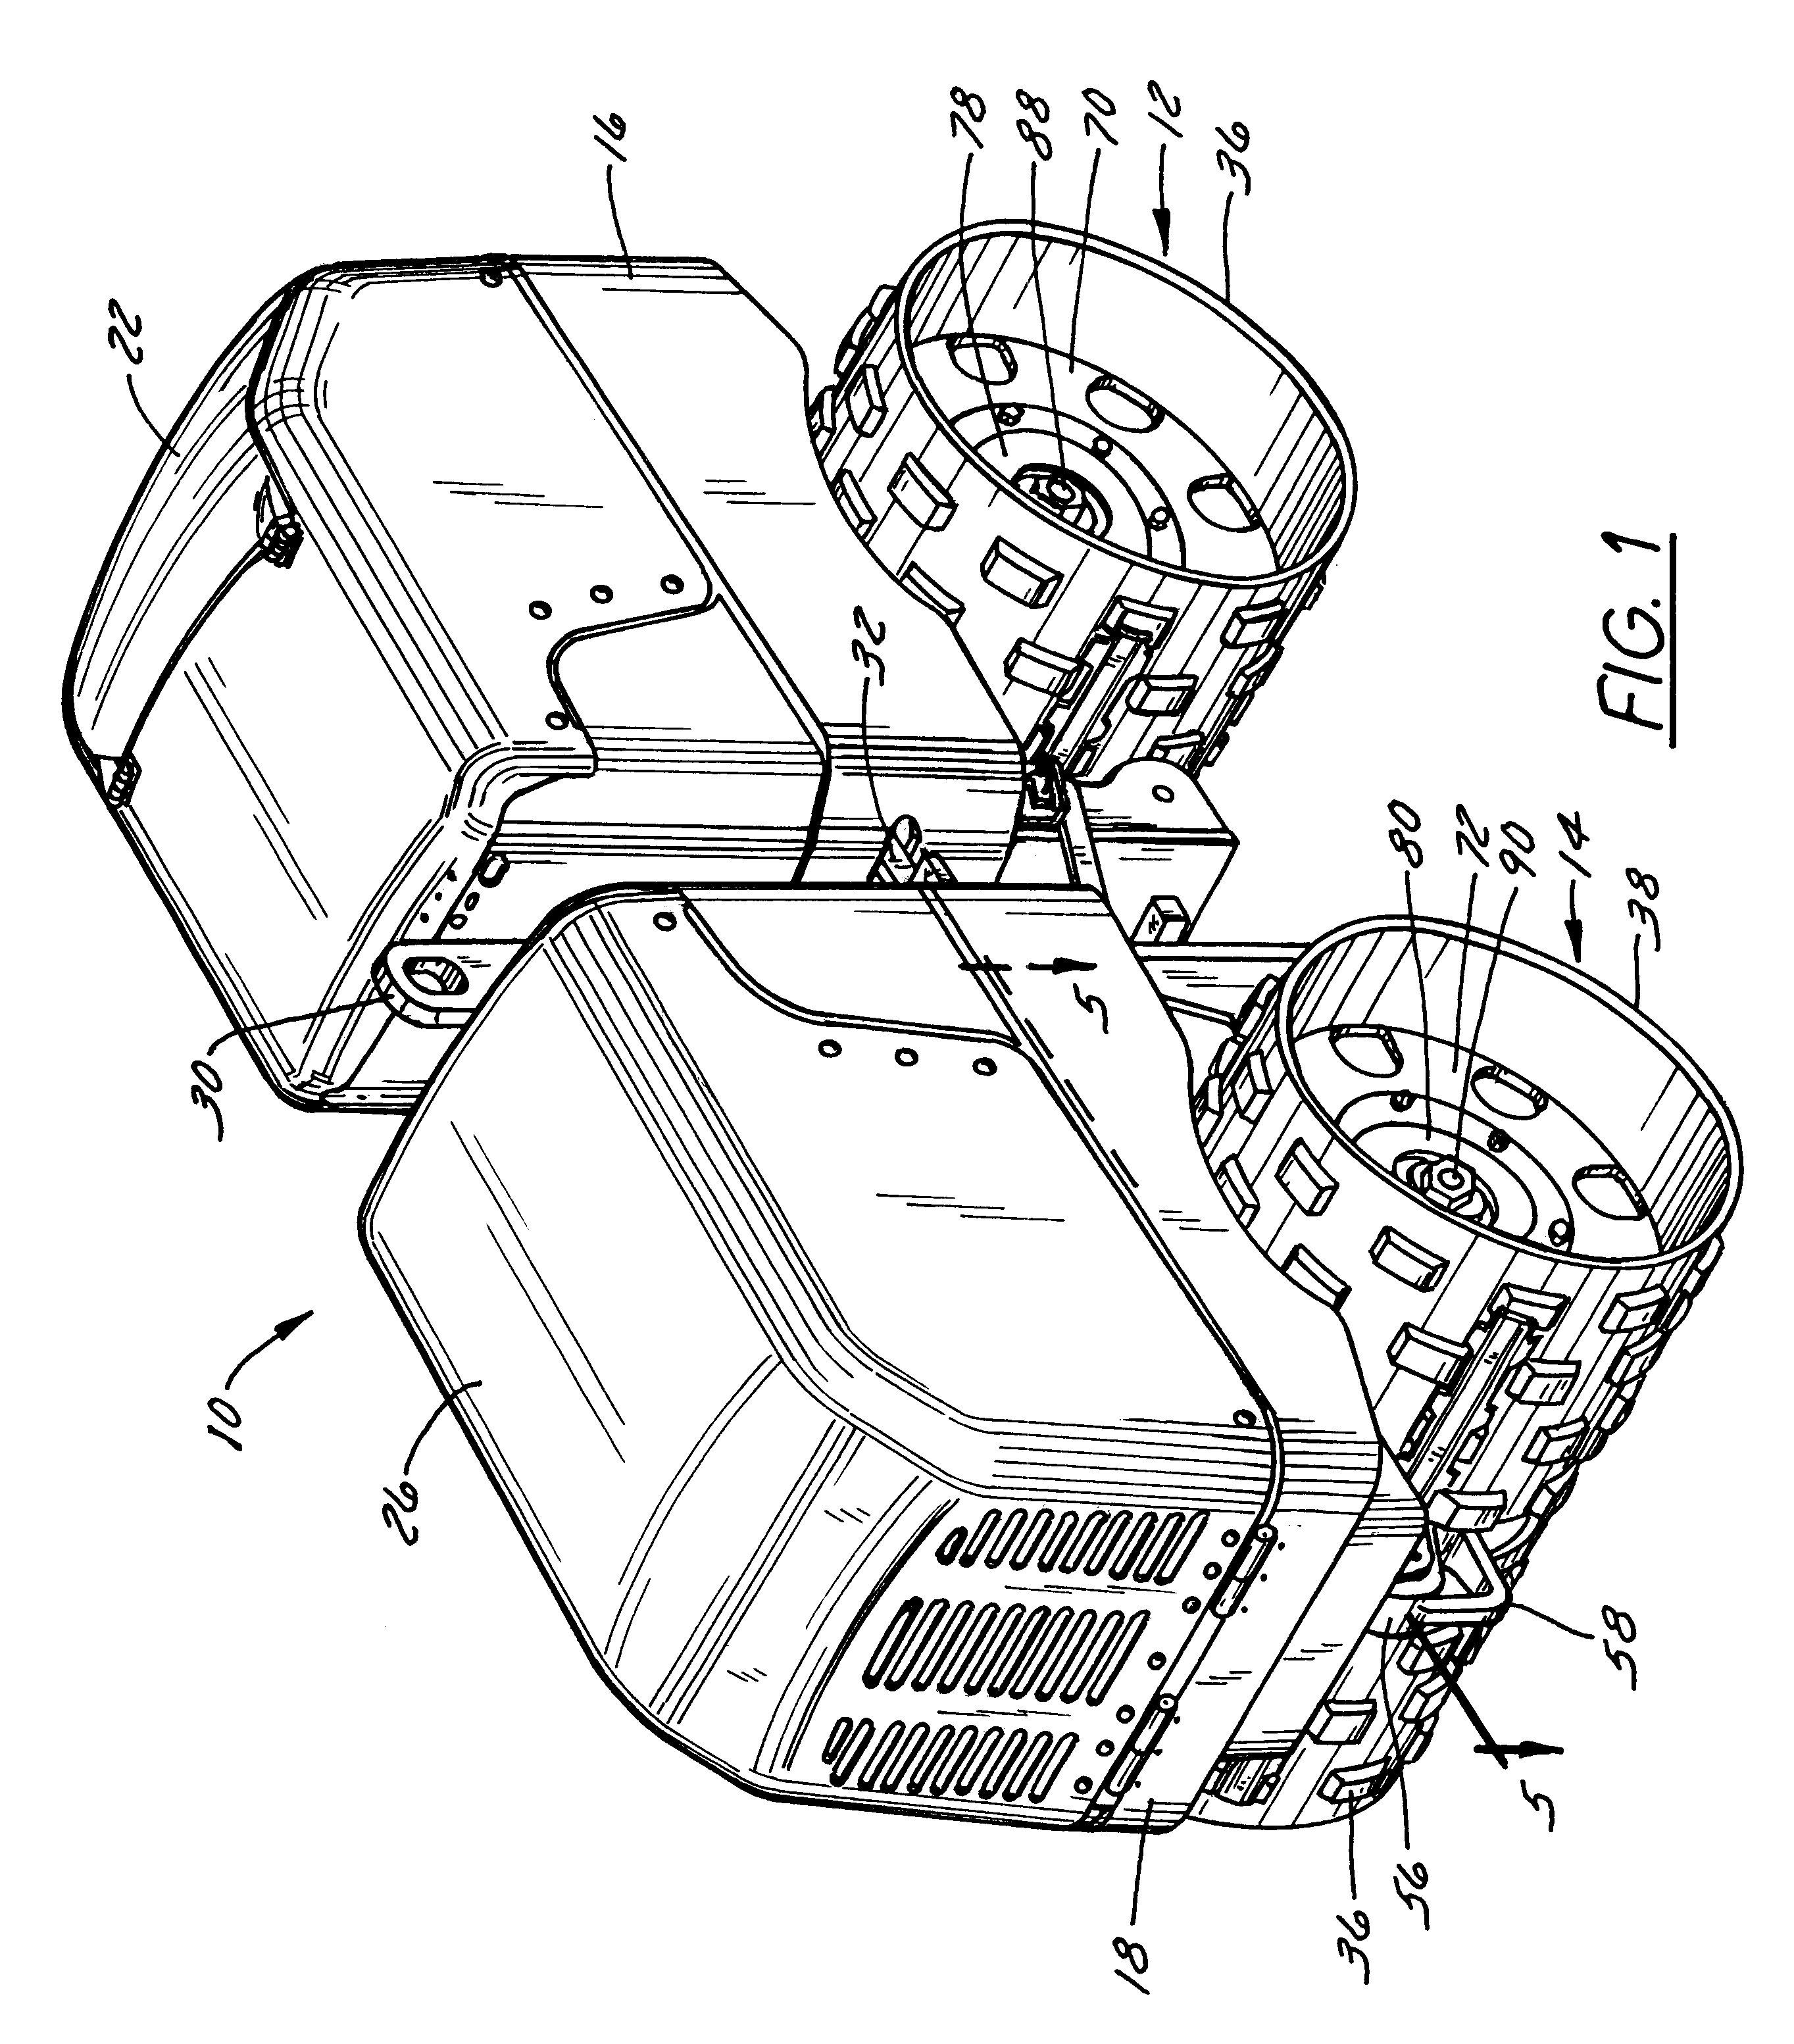 Vibratory compactor and compact exciter assembly usable therewith